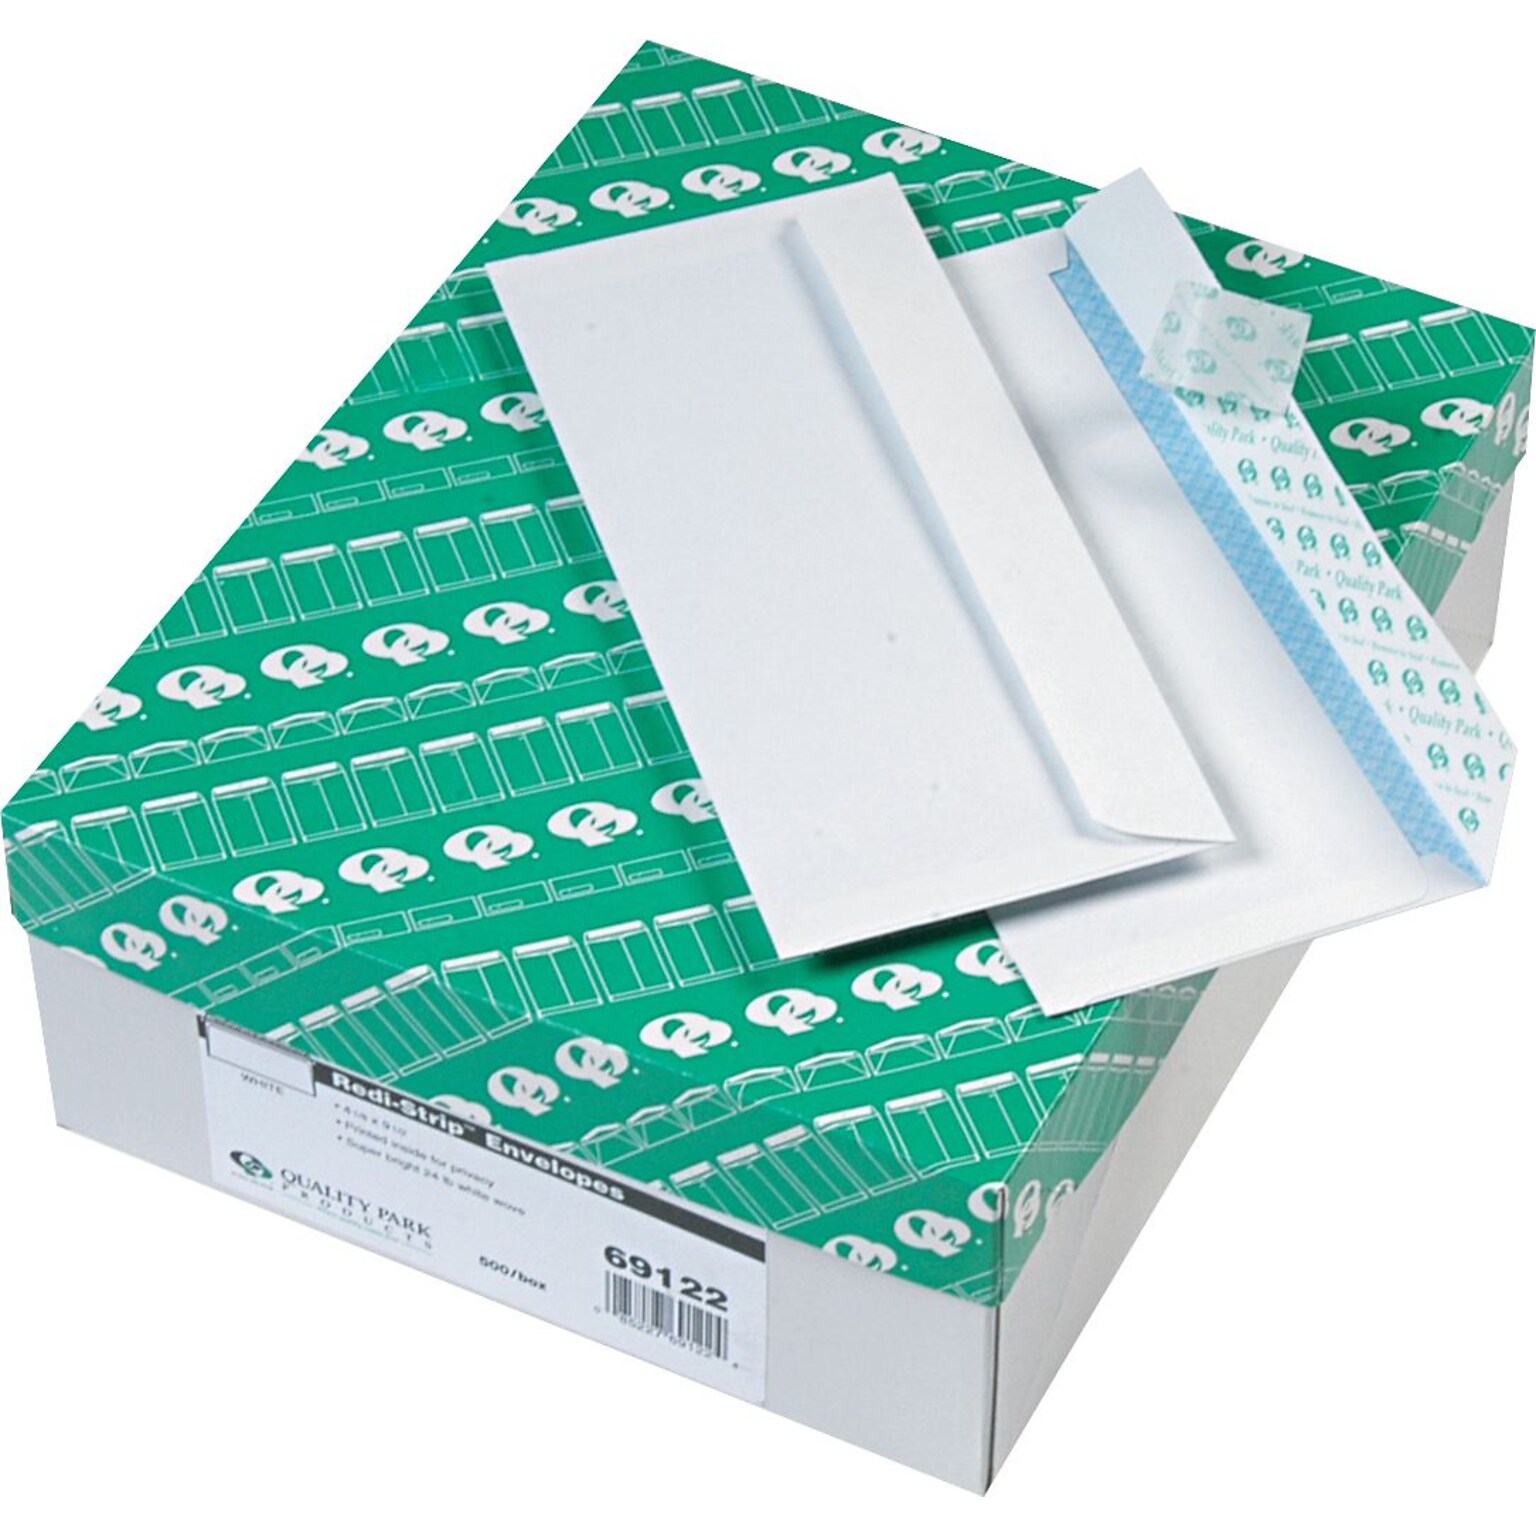 Quality Park Redi-Strip Self Seal Security Tinted #10 Business Envelope, 4 1/8 x 9 1/2, White Wove, 500/Box (69122)